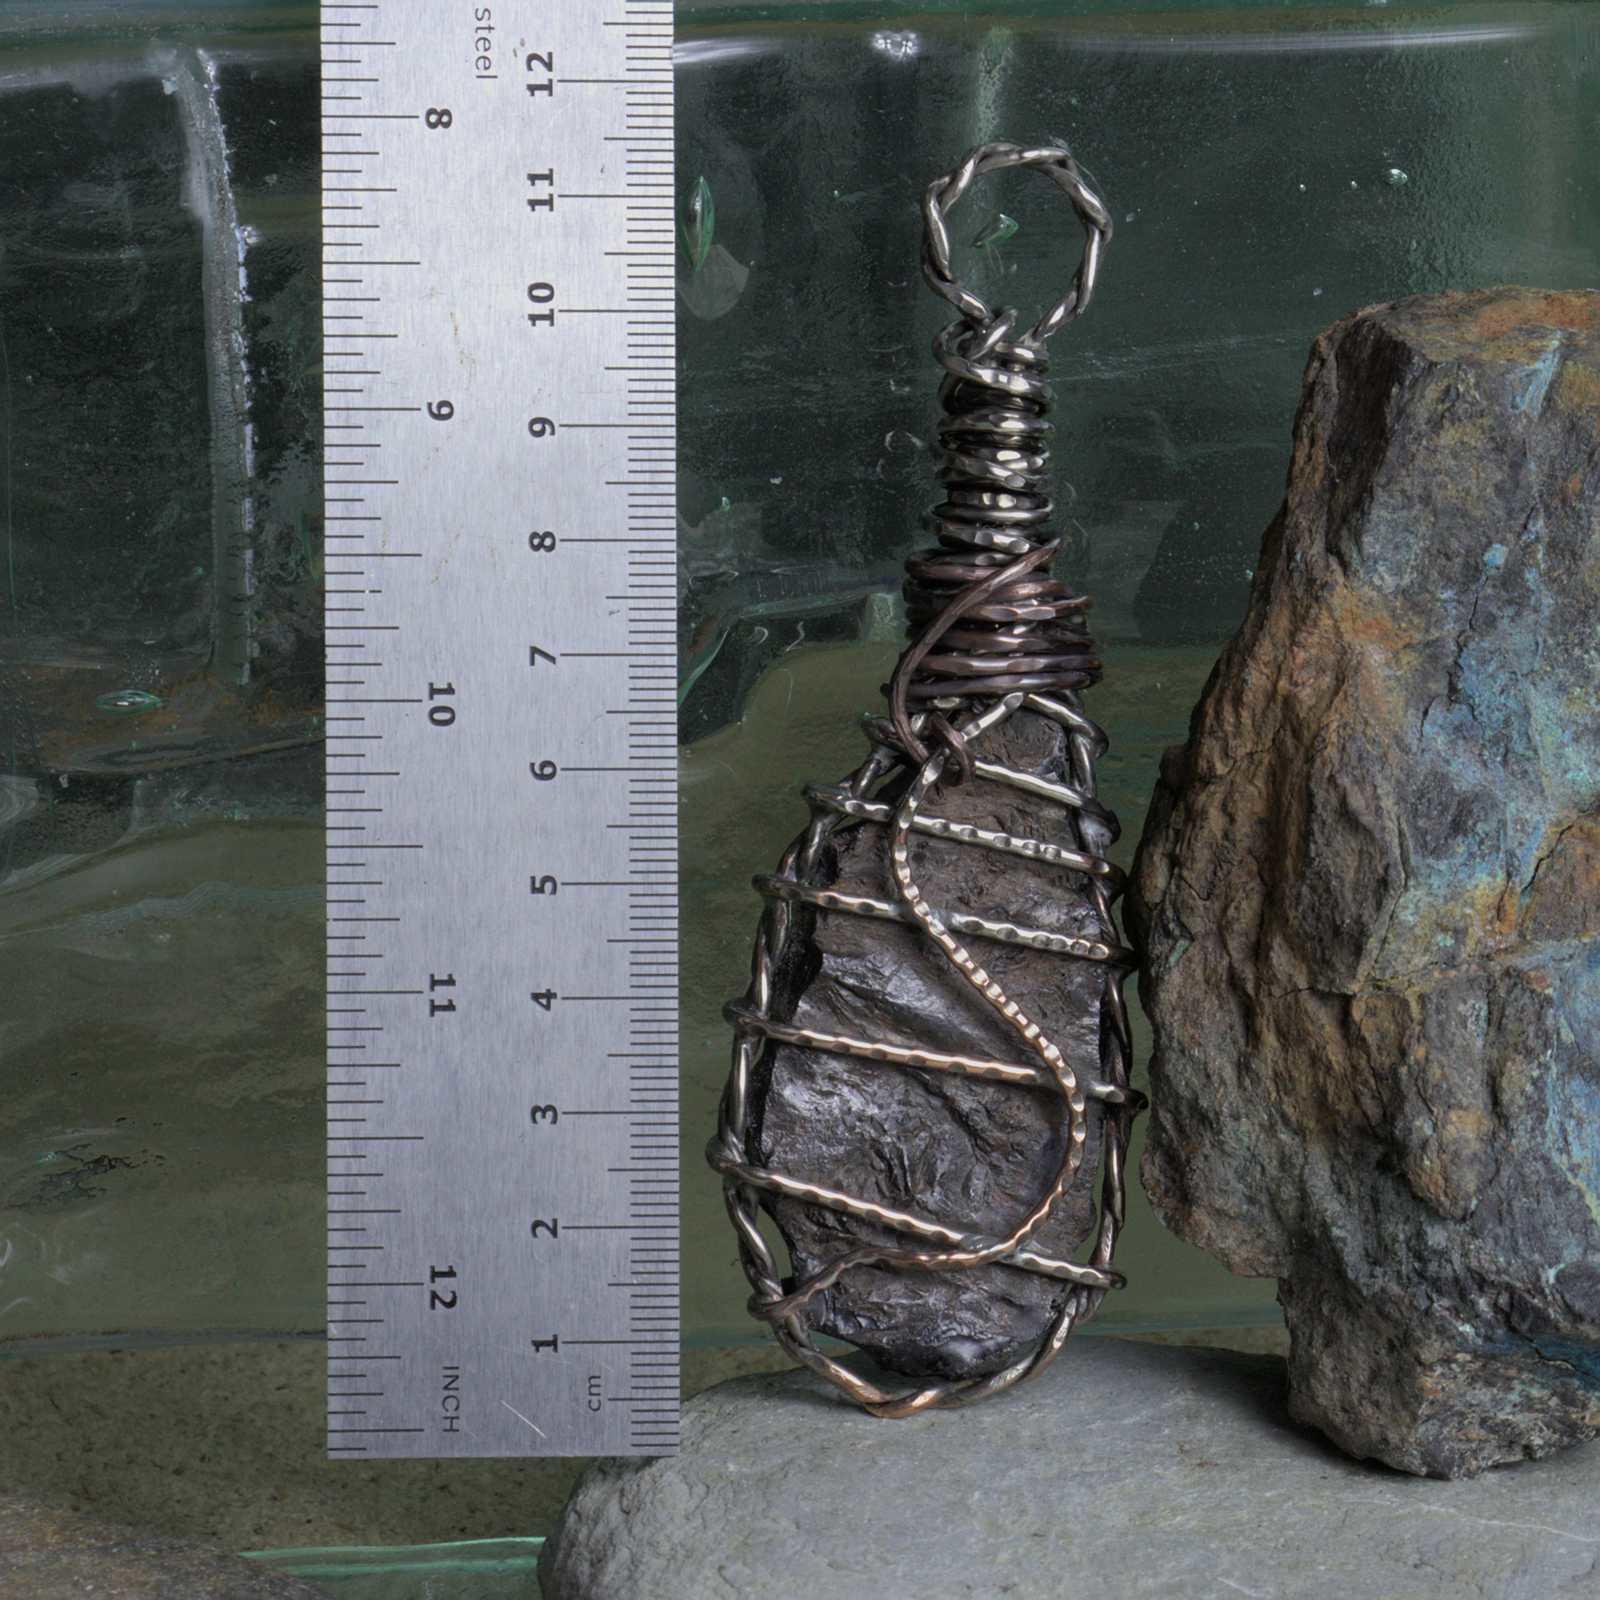 Copper slag accessory with ruler to show scale